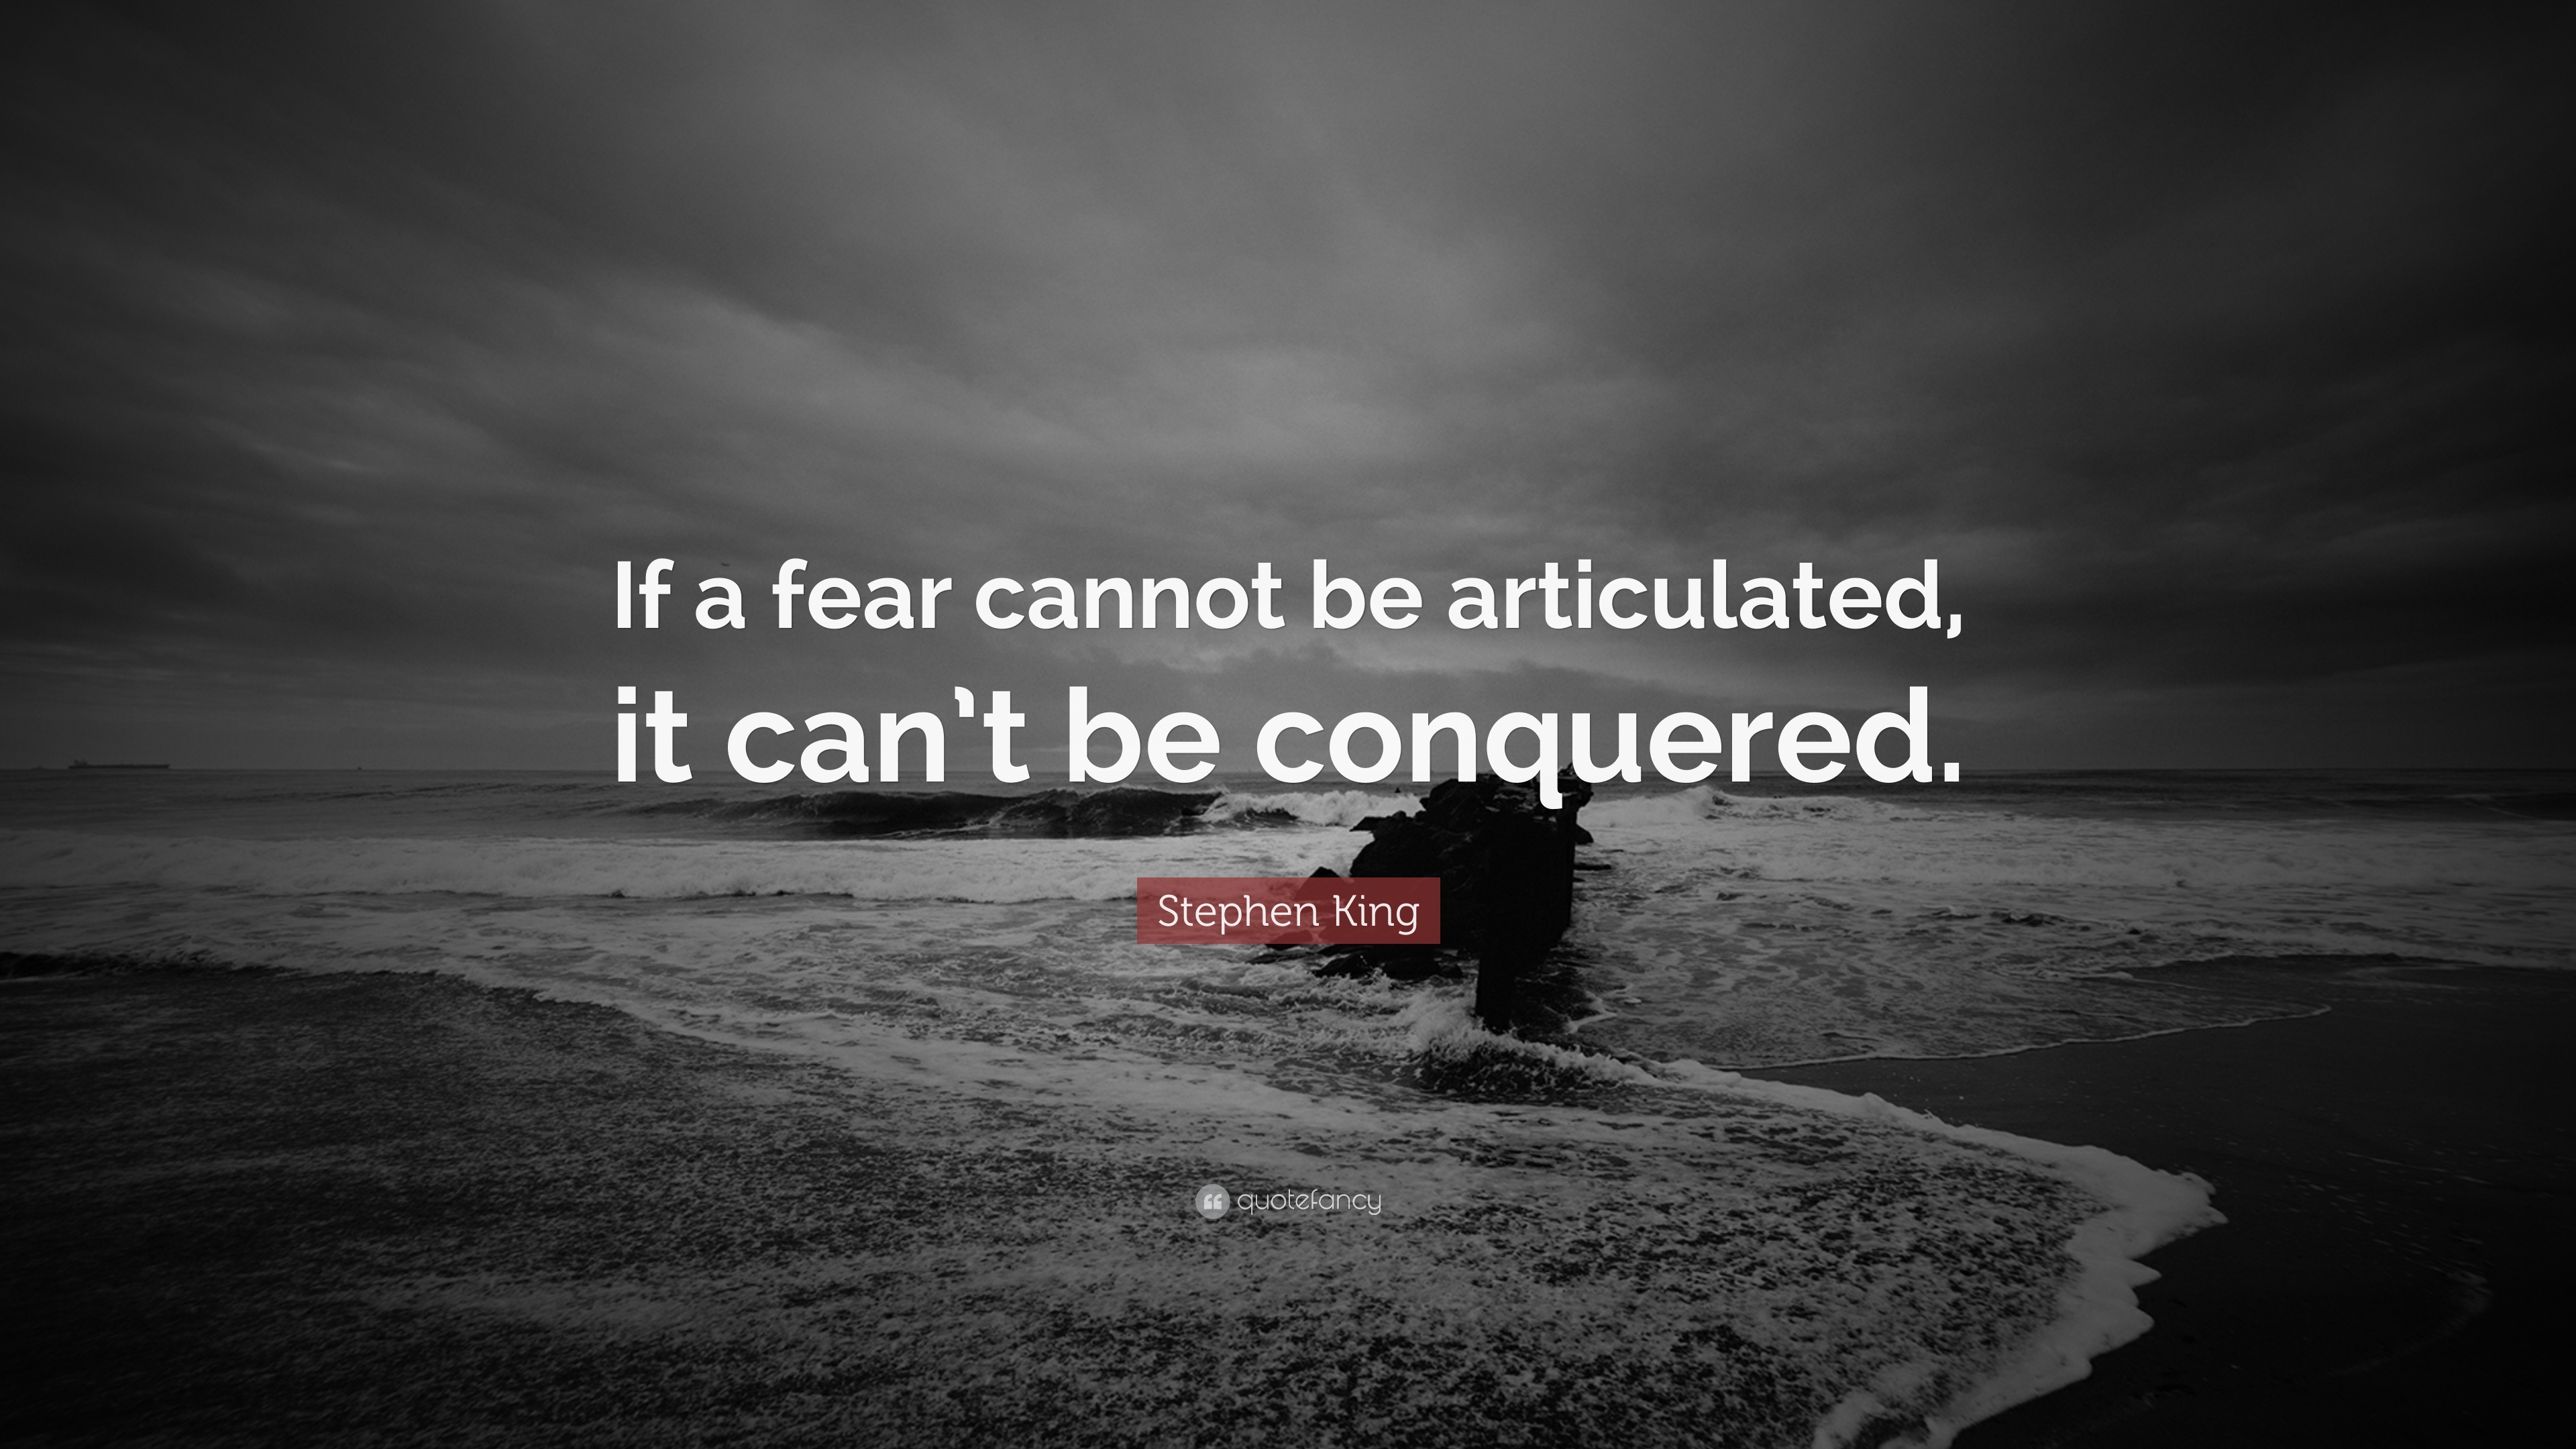 What are some Stephen King quotes about the power of fear?